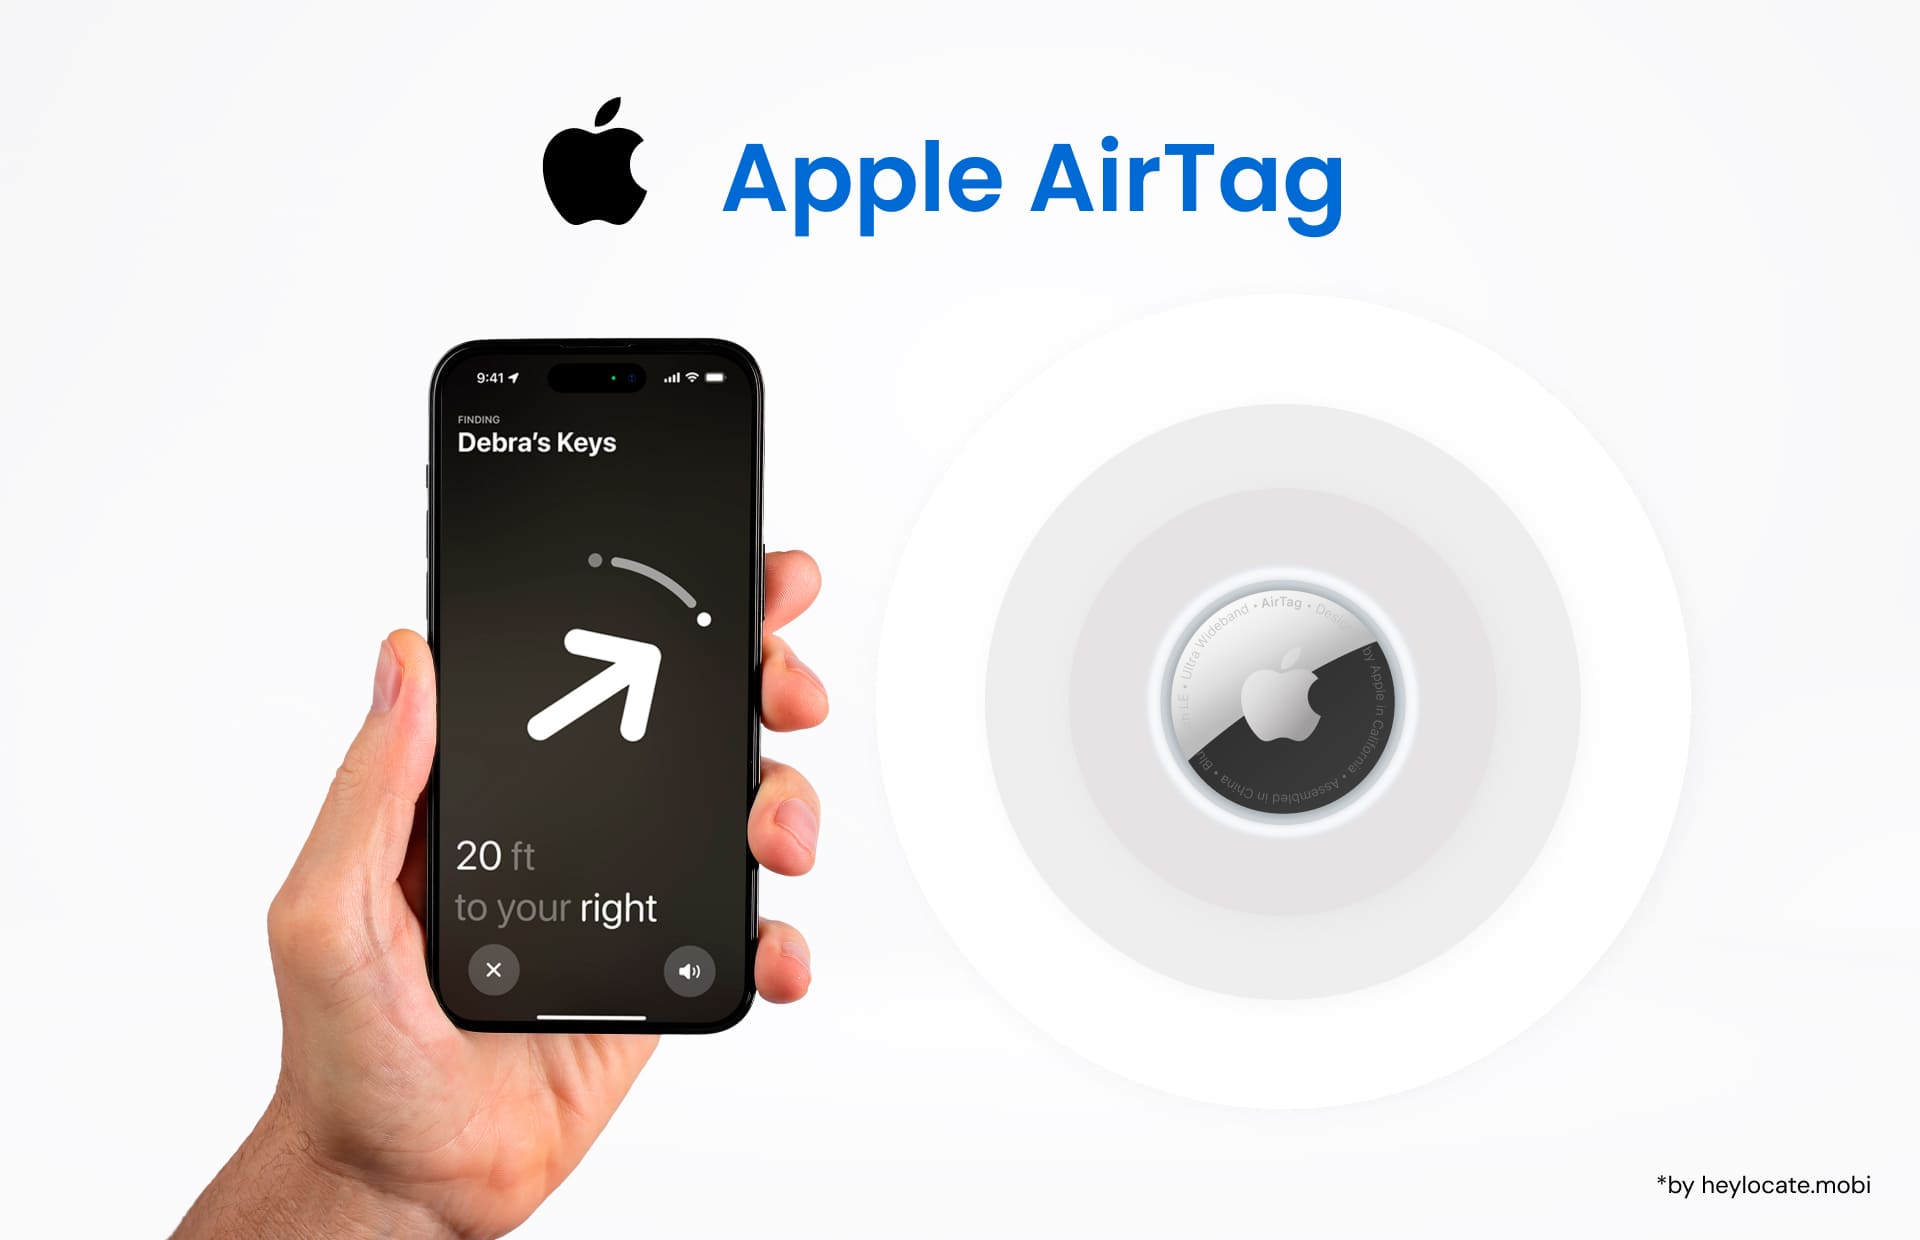 An image showing a hand holding an iPhone with the Apple AirTag tracking interface on the screen, and an Apple AirTag illustrating the device tracking feature